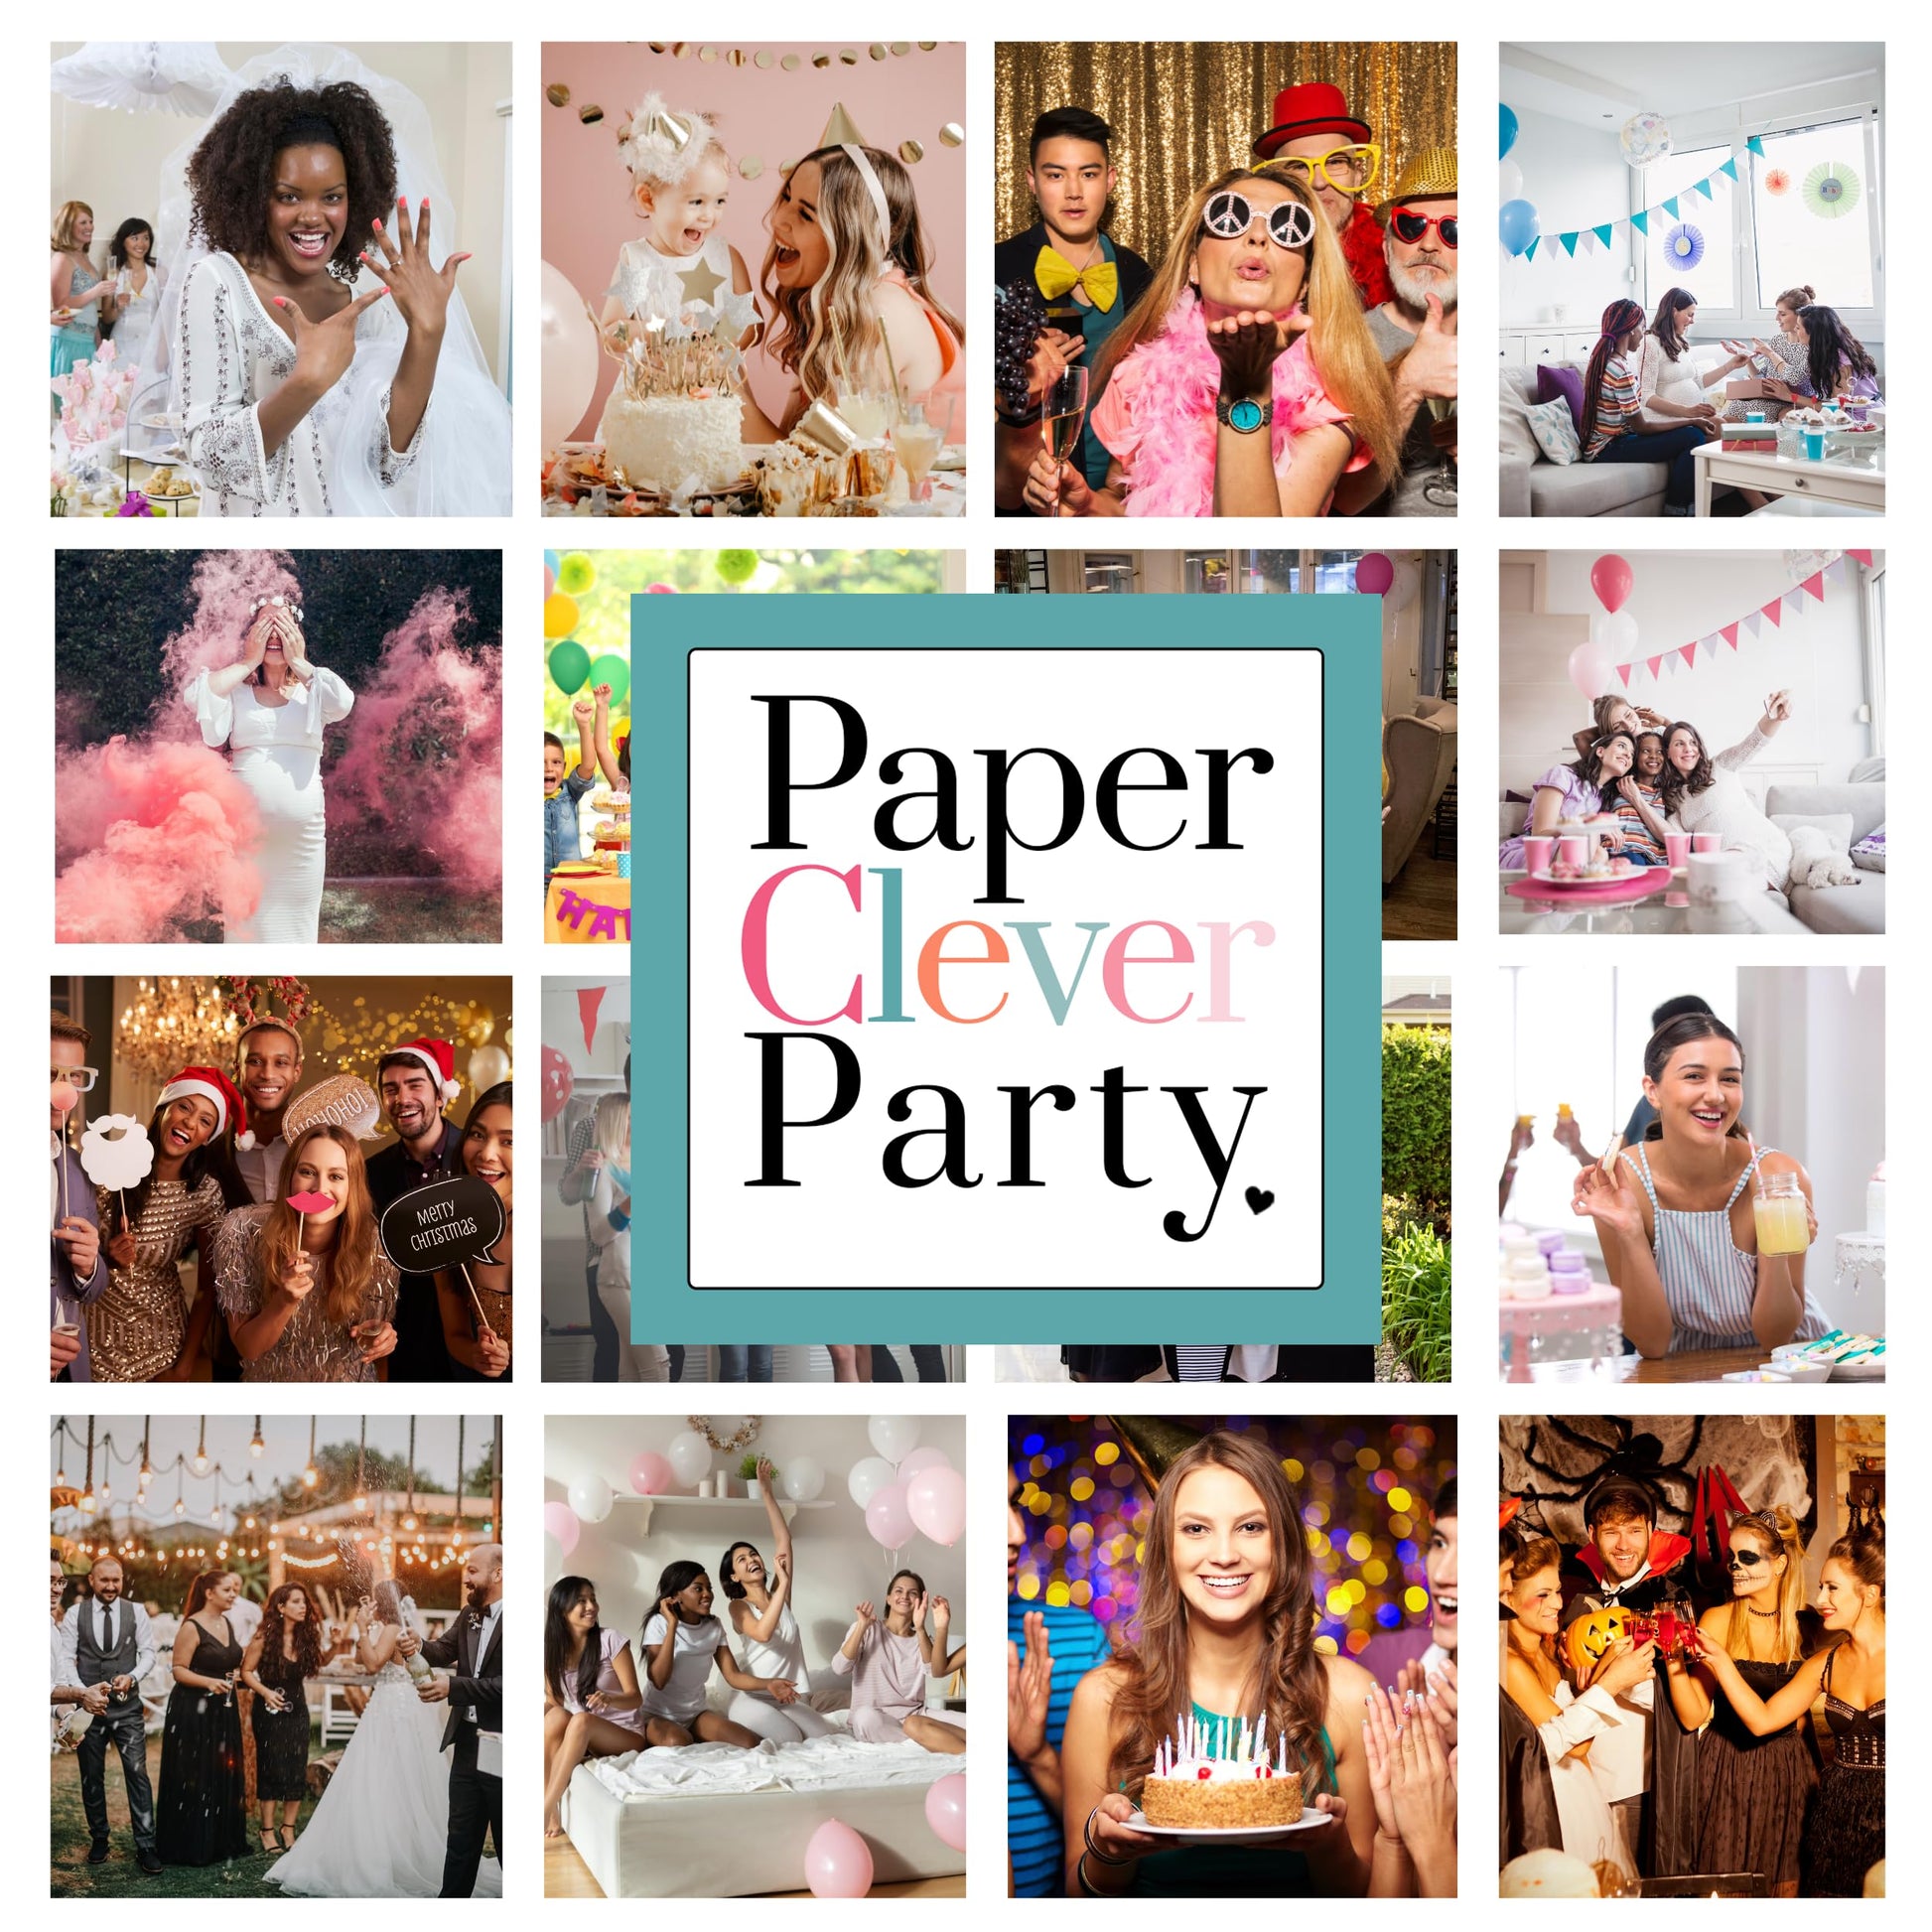 Girl - Rustic 5x7 Cards, 25 Guest PackPaper Clever Party